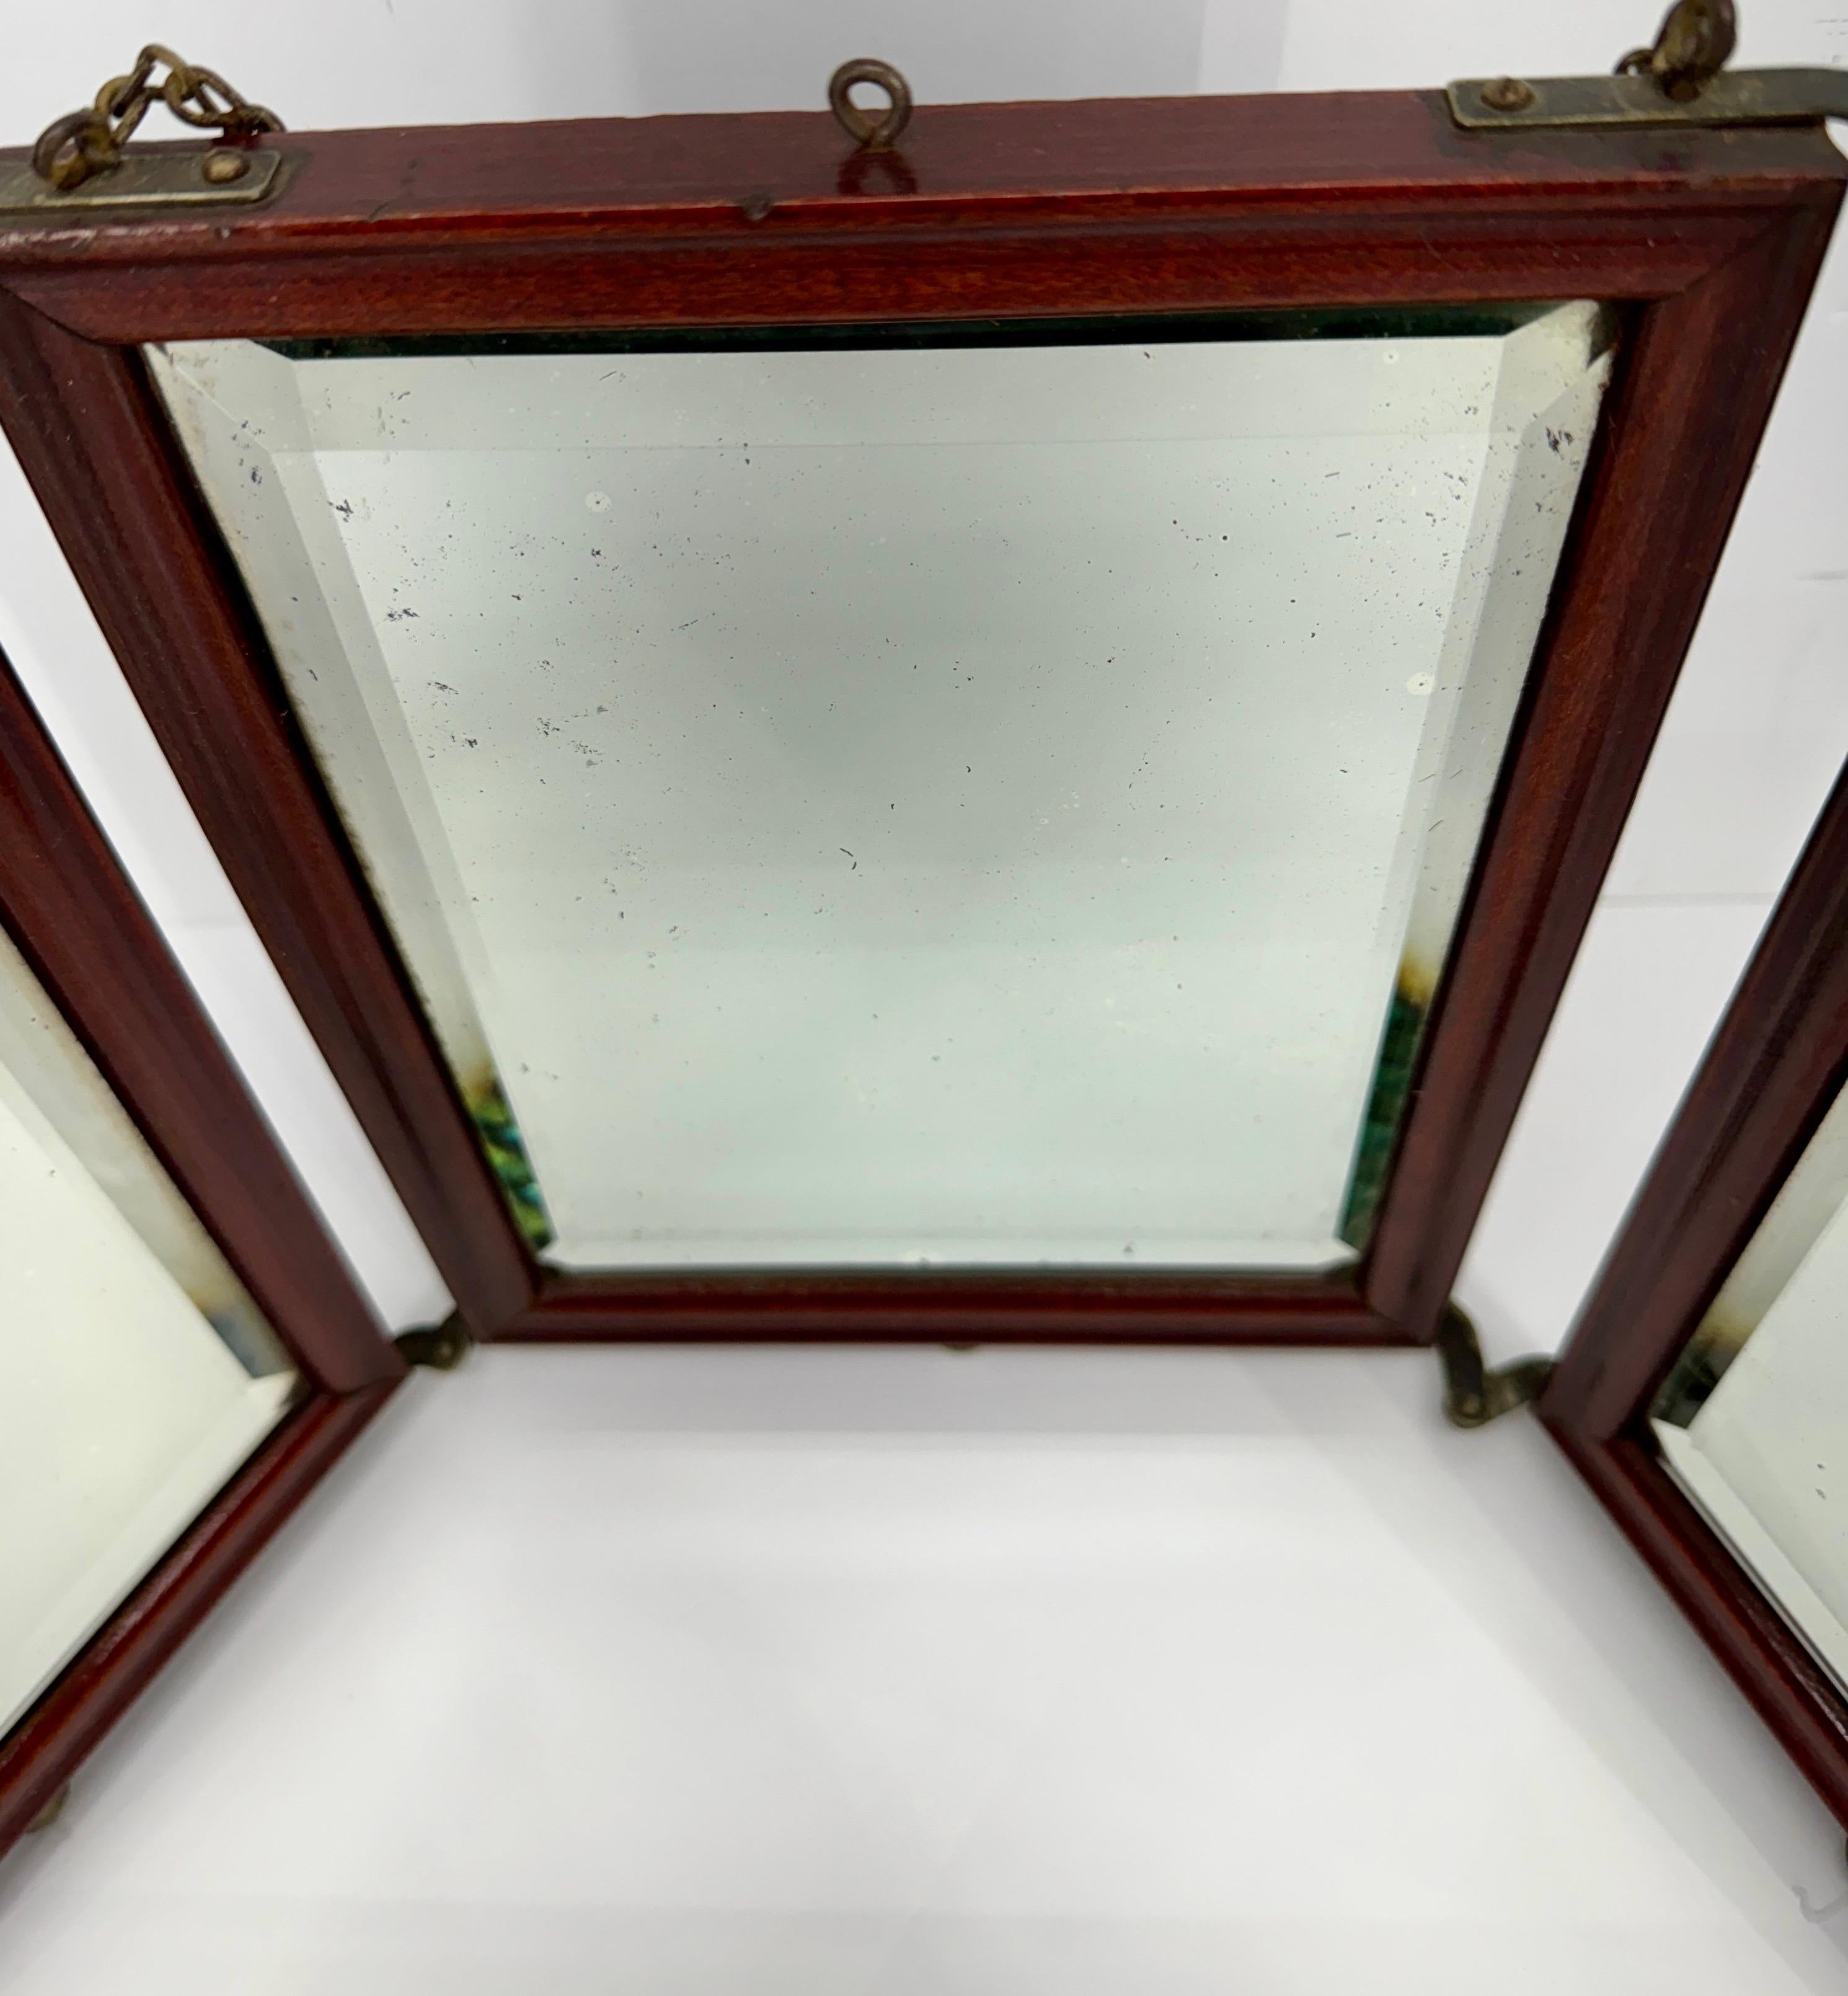 Tri-Fold Travel Vanity Or Dresser Mirror With Beveled Glass In Good Condition For Sale In Haddonfield, NJ